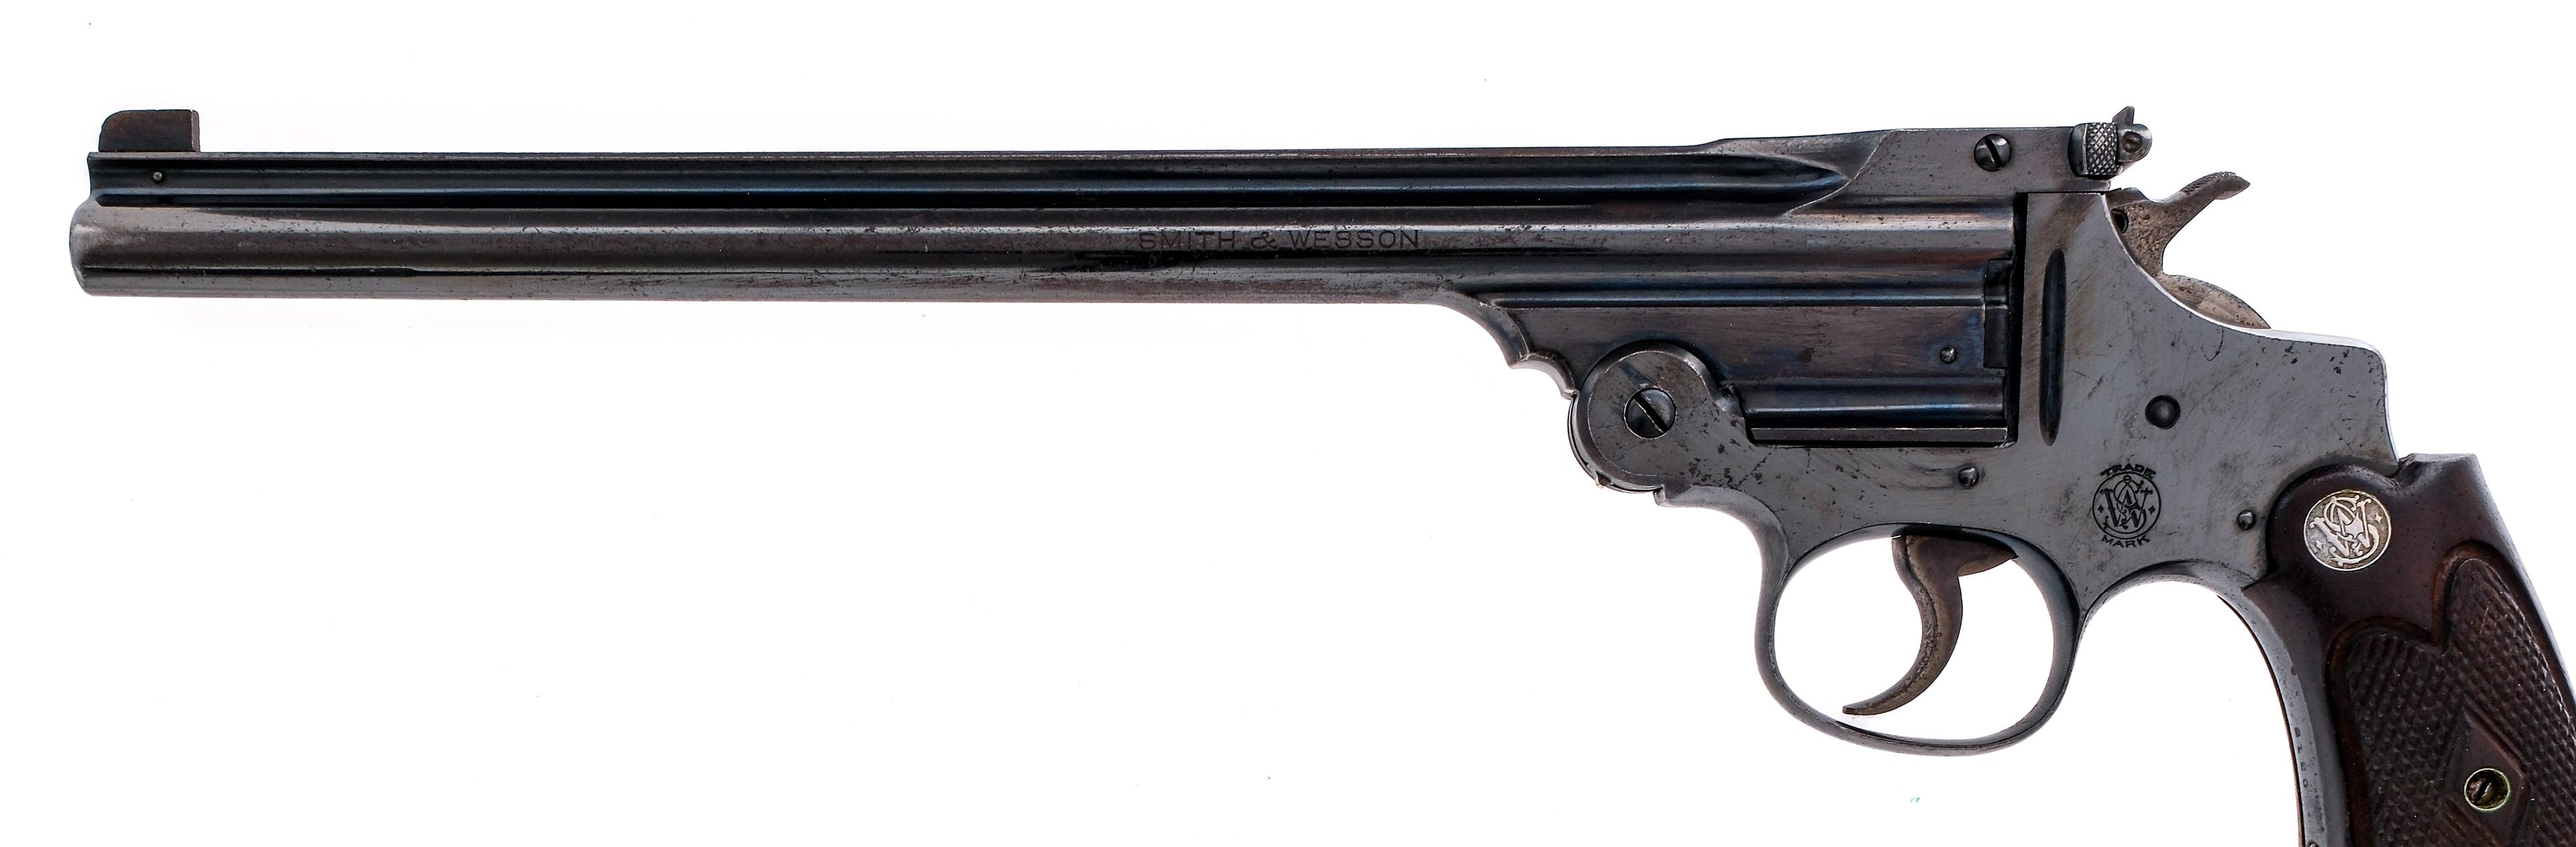 Smith & Wesson 1891 2nd Model .22 LR Pistol